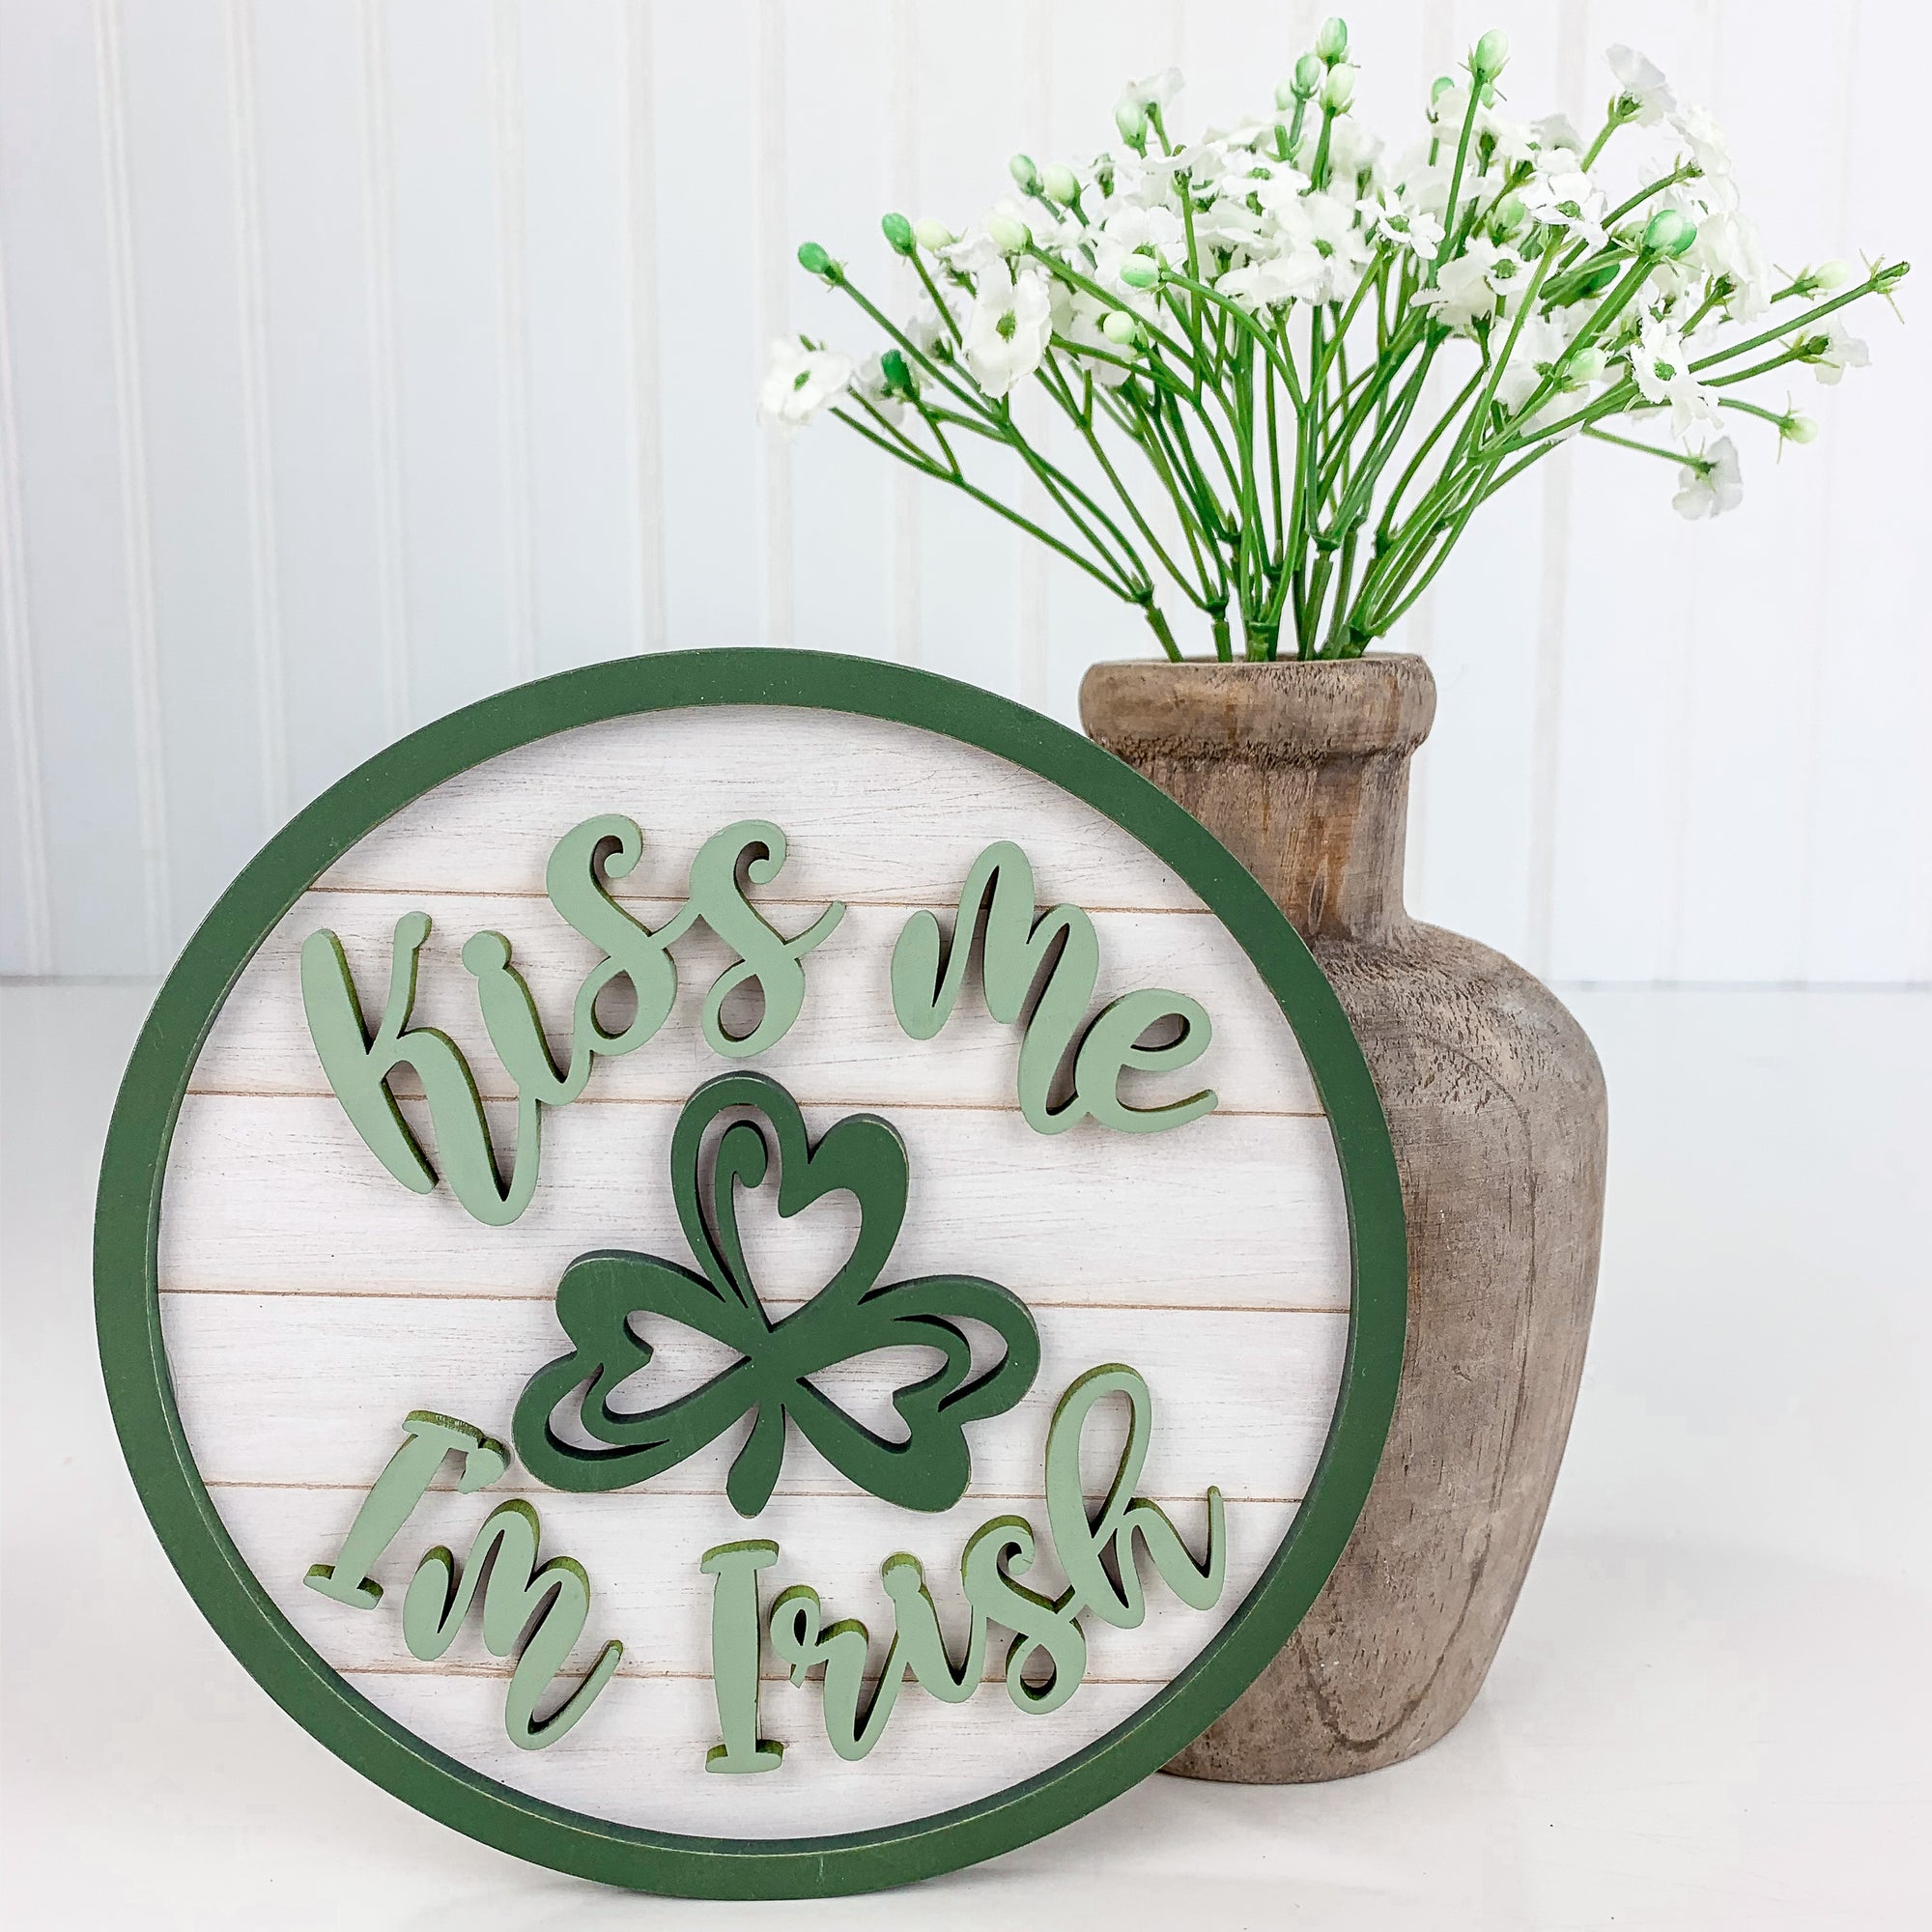 Round wood shiplap sign for styling tiered rays, mantles, shelves, and more.  6 inch round wood sign.  St Patricks wood home decor.  Kiss Me I'm Irish home sign. 